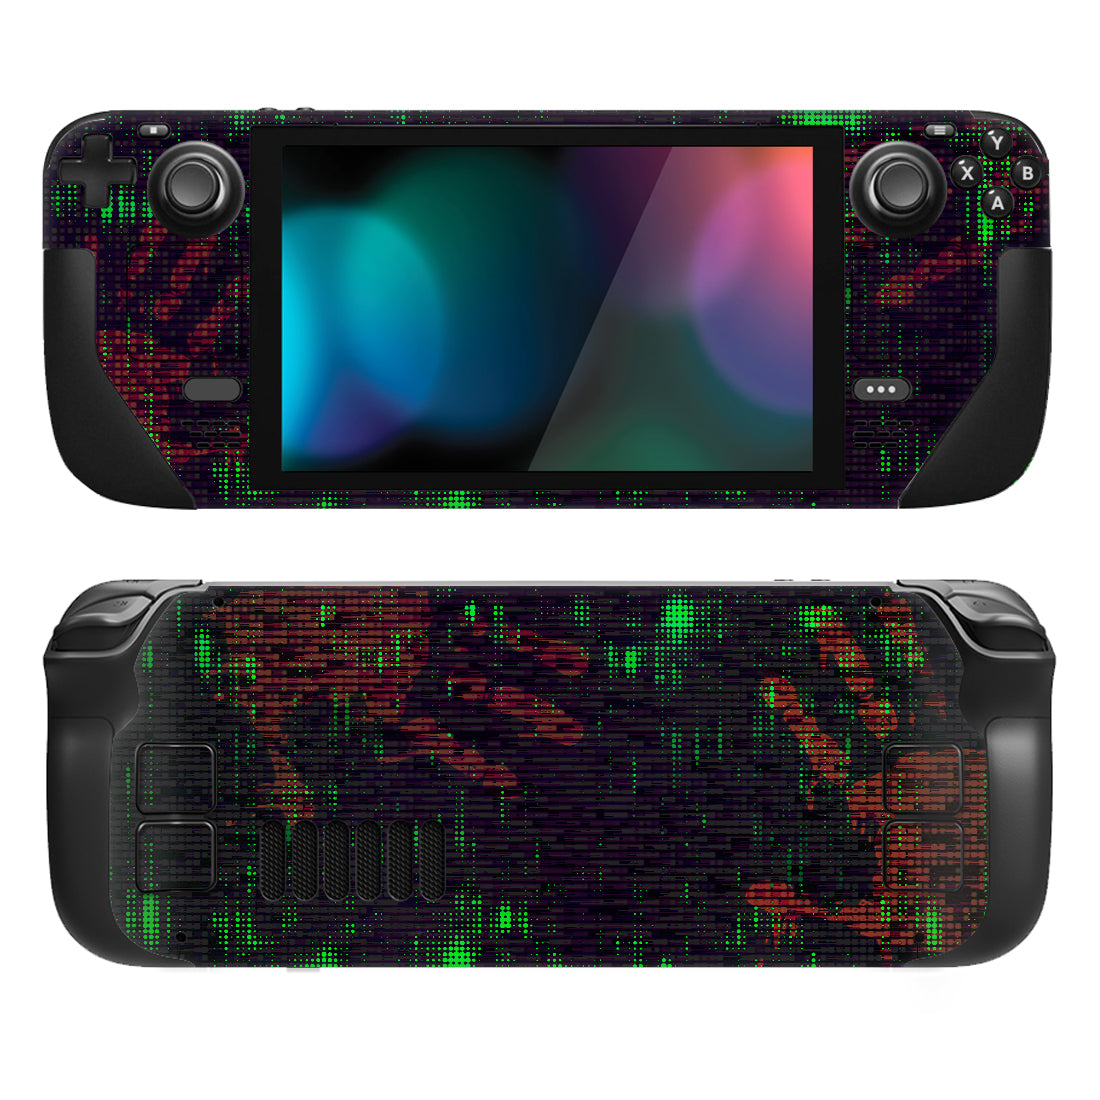 PlayVital Full Set Protective Skin Decal for Steam Deck, Custom Stickers Vinyl Cover for Steam Deck Handheld Gaming PC - Mystery Palm Print - SDTM039 playvital